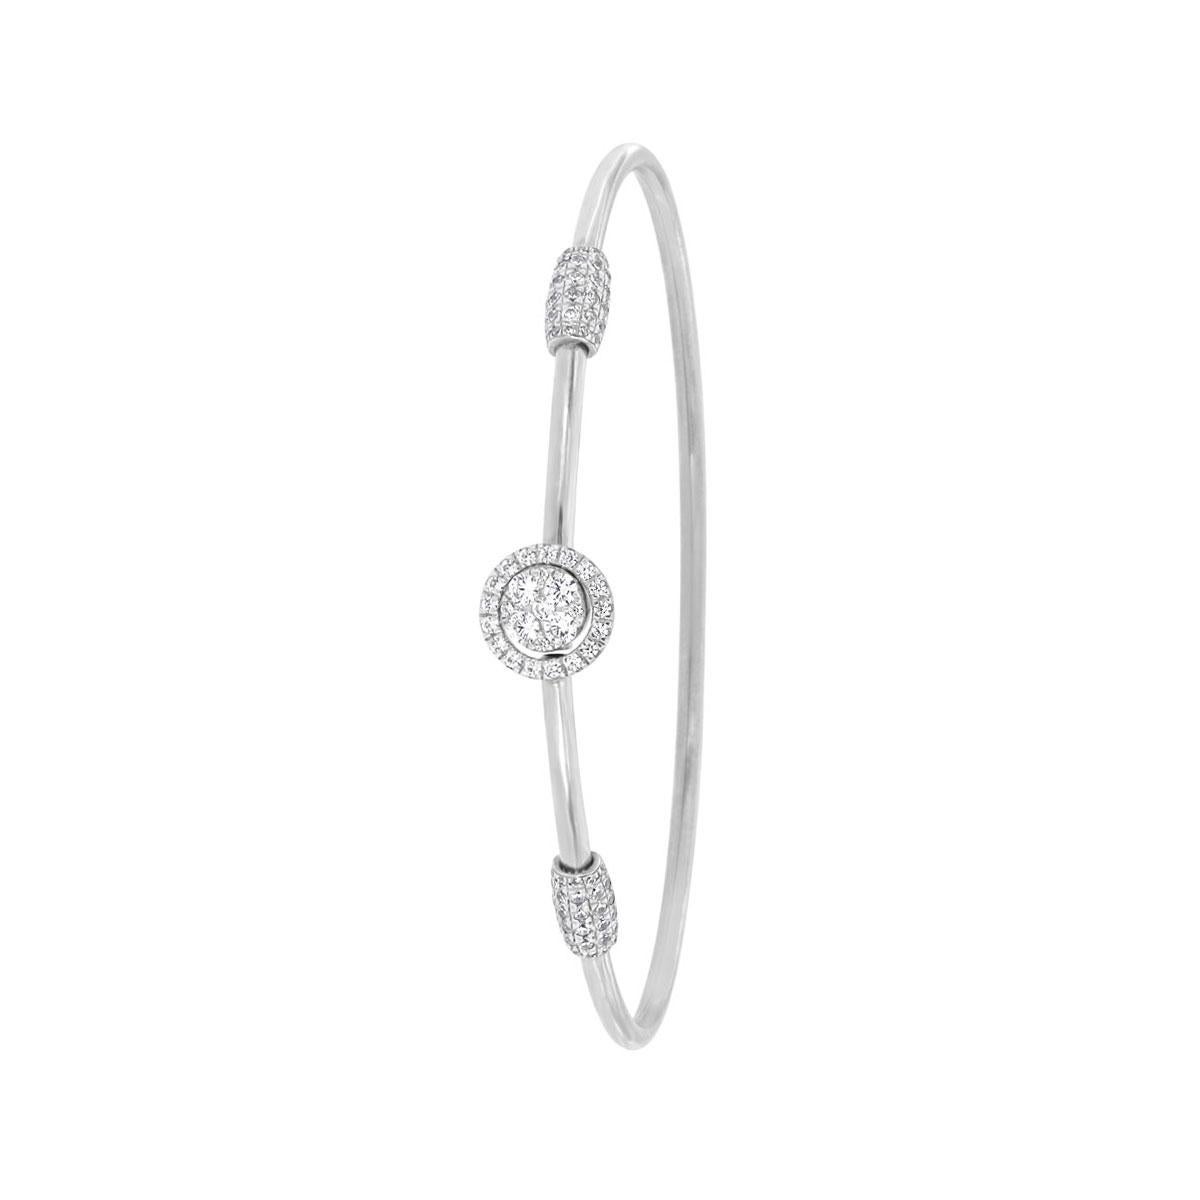 This fashionable flex bangle features round brilliant diamonds micro-prong-set in a round halo. Experience the difference!

Product details: 

Center Gemstone Type: NATURAL DIAMOND
Center Gemstone Color: WHITE
Center Gemstone Shape: ROUND
Center